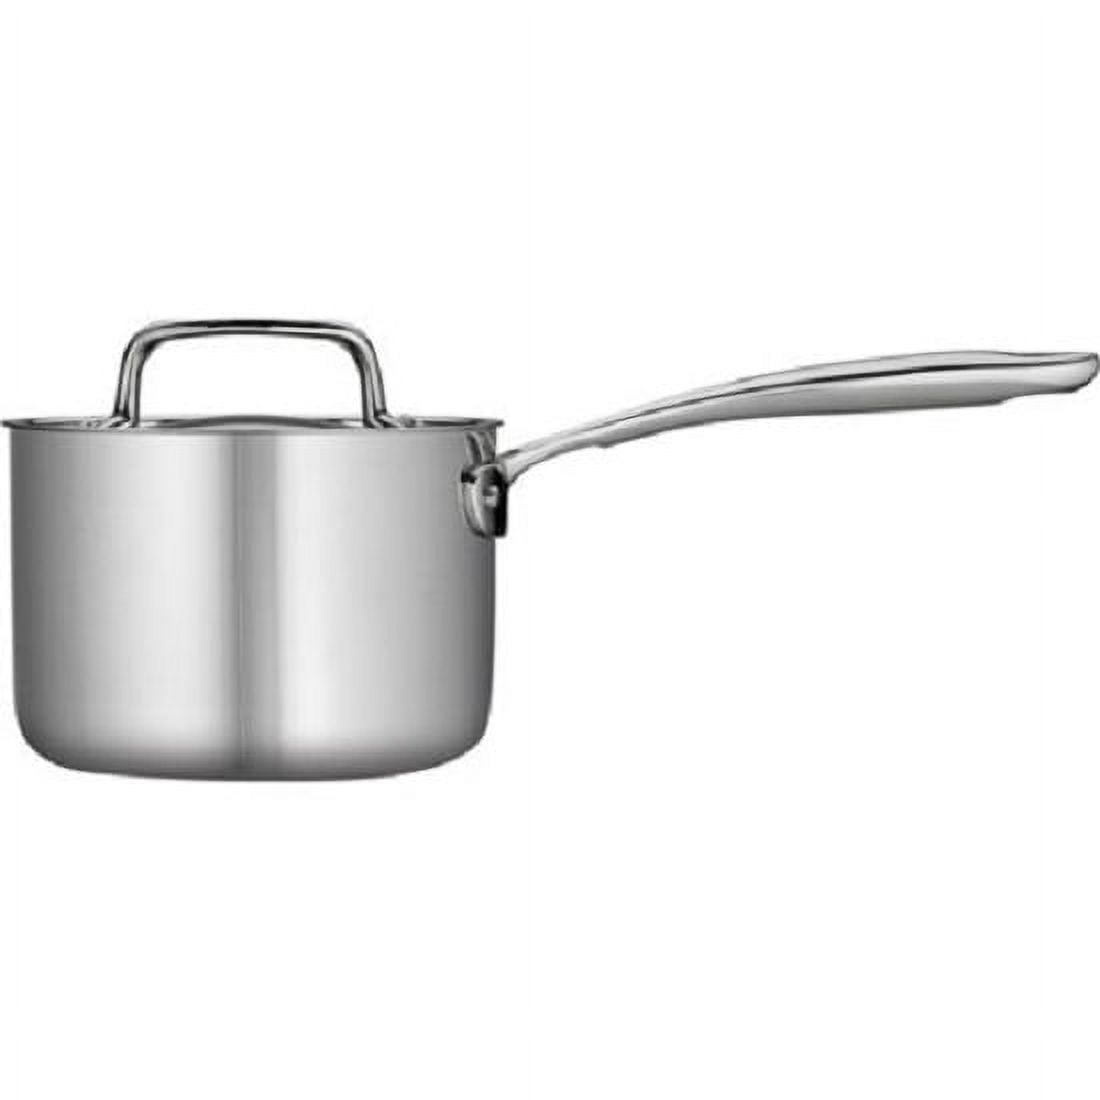 Tri-Ply Clad 2 Qt Covered Stainless Steel Covered Sauce Pan - Glass Lid -  Tramontina US